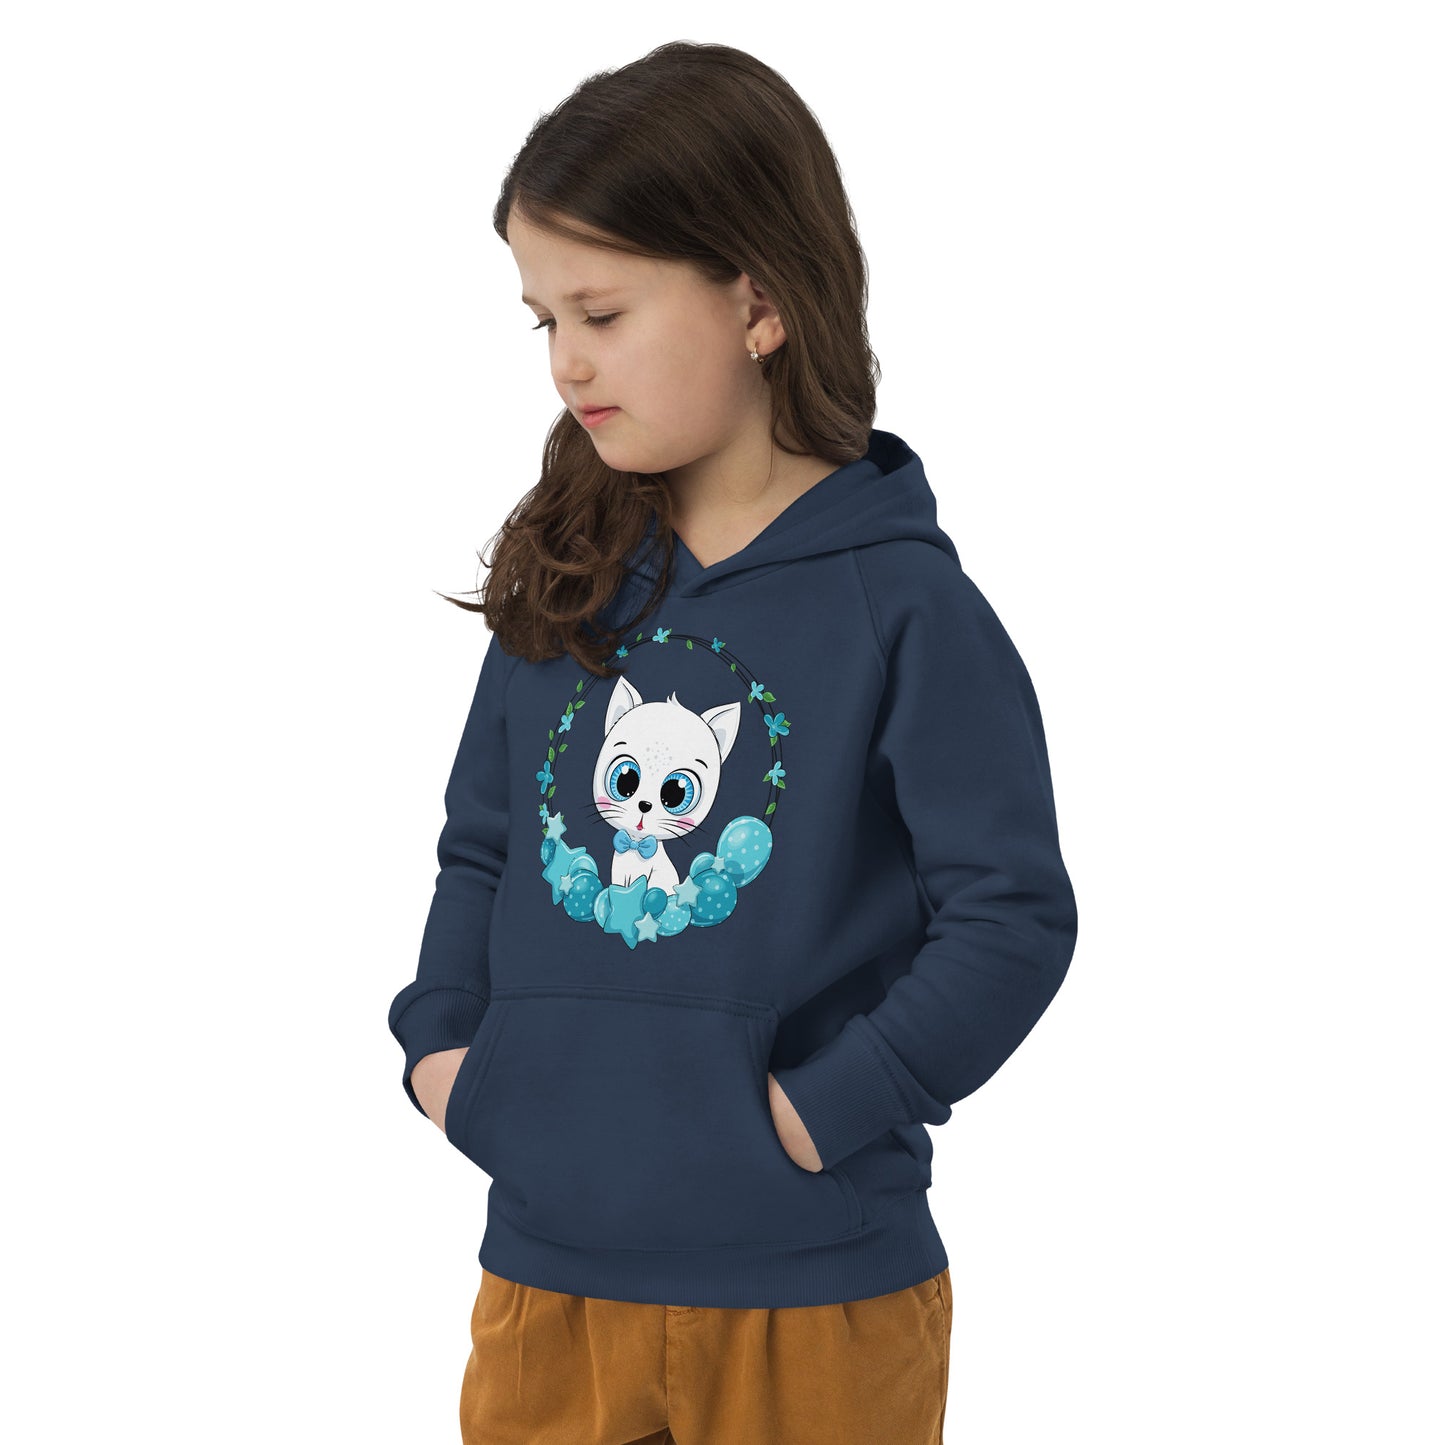 Cute Cat with Balloon Wreath Hoodie, No. 0164